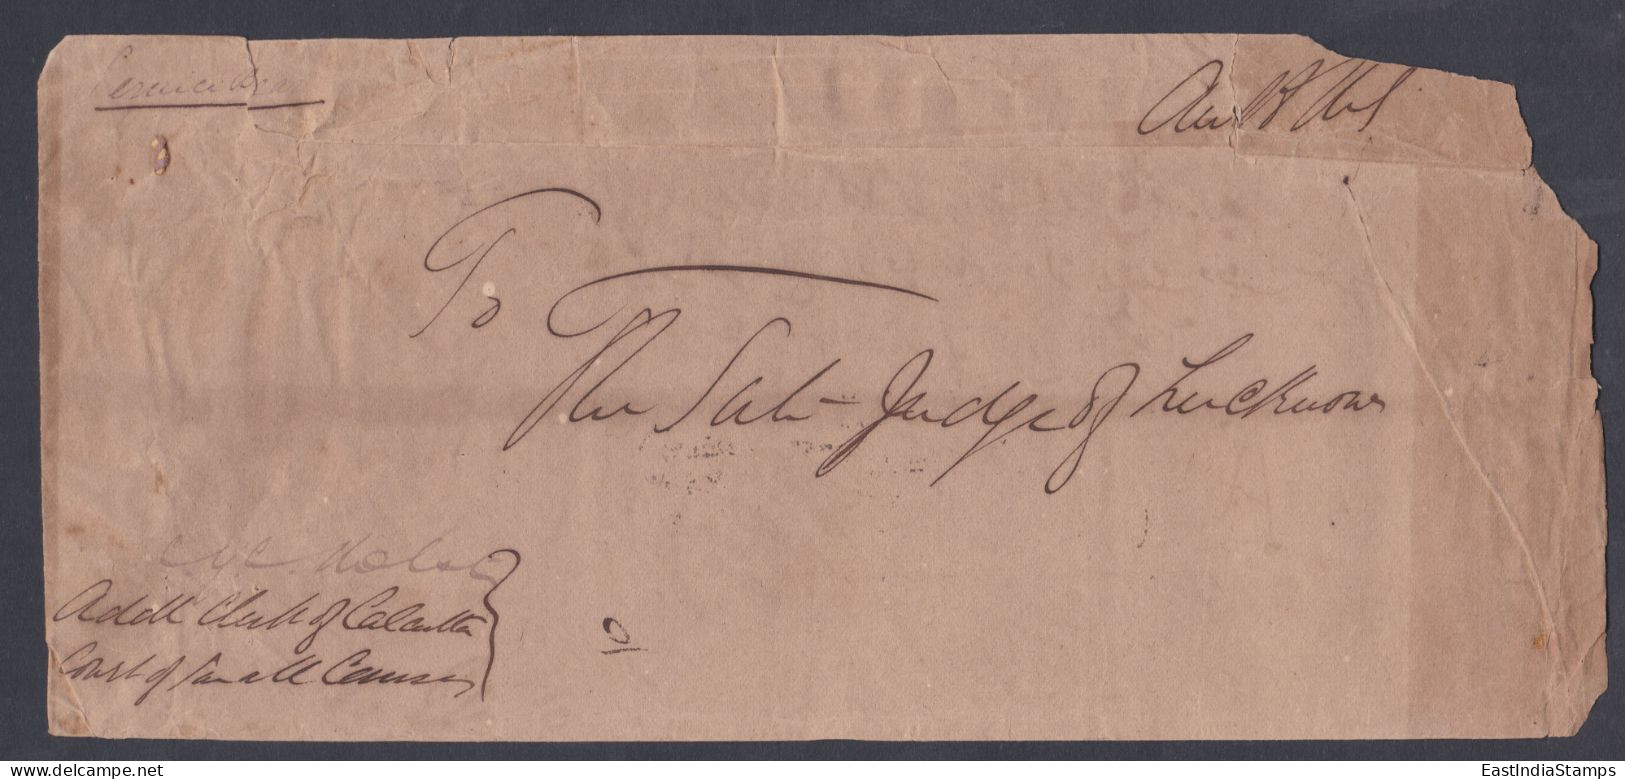 Inde British India 1870's Used Stampless Cover, Postage Due, One Anna, Calcutta To Lucknow, Judge - 1858-79 Crown Colony